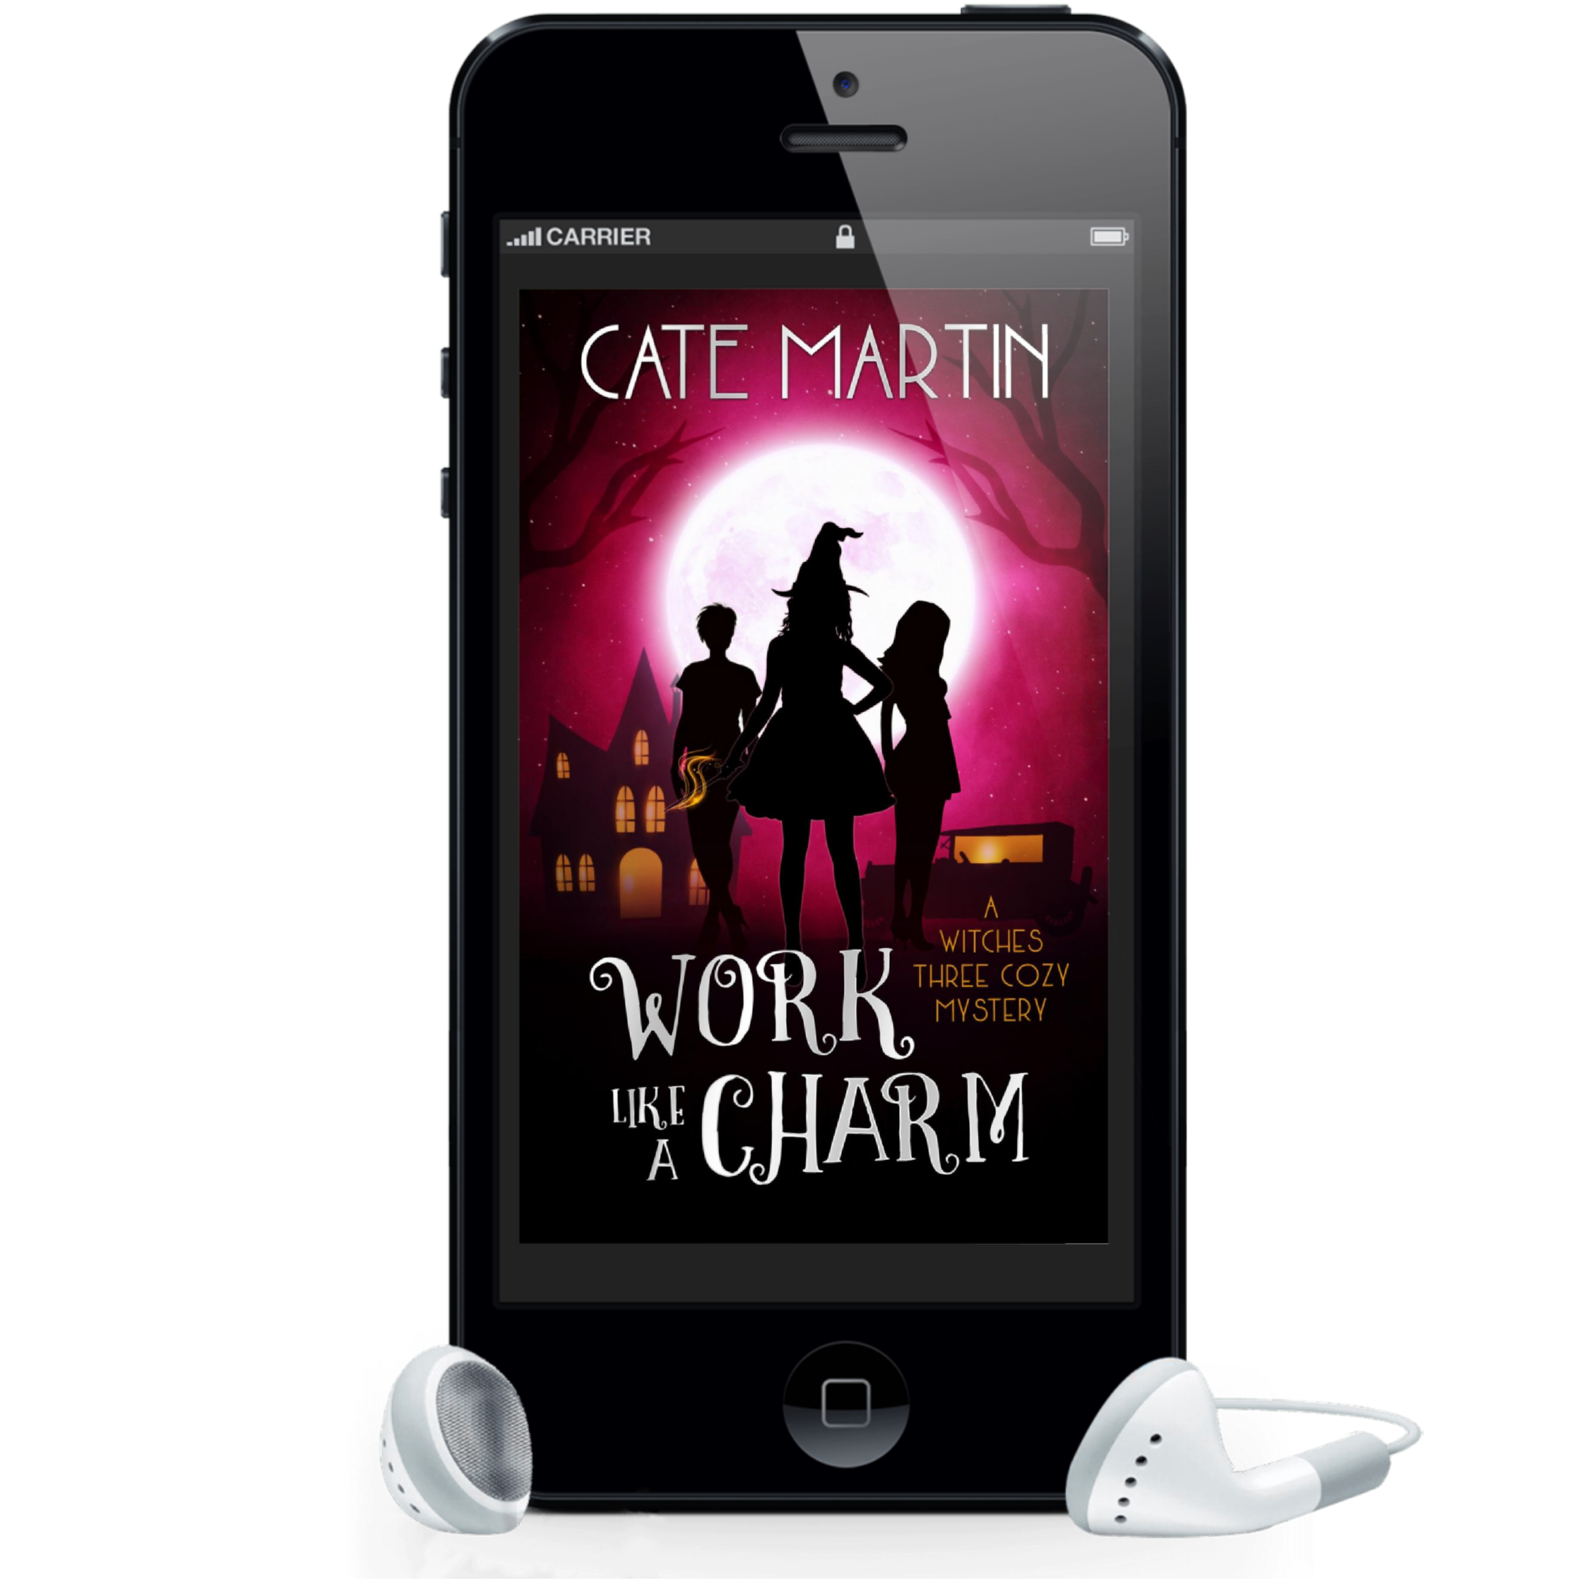 Cover for the audiobook of Work Like a Charm: A Witches Three Cozy Mystery.